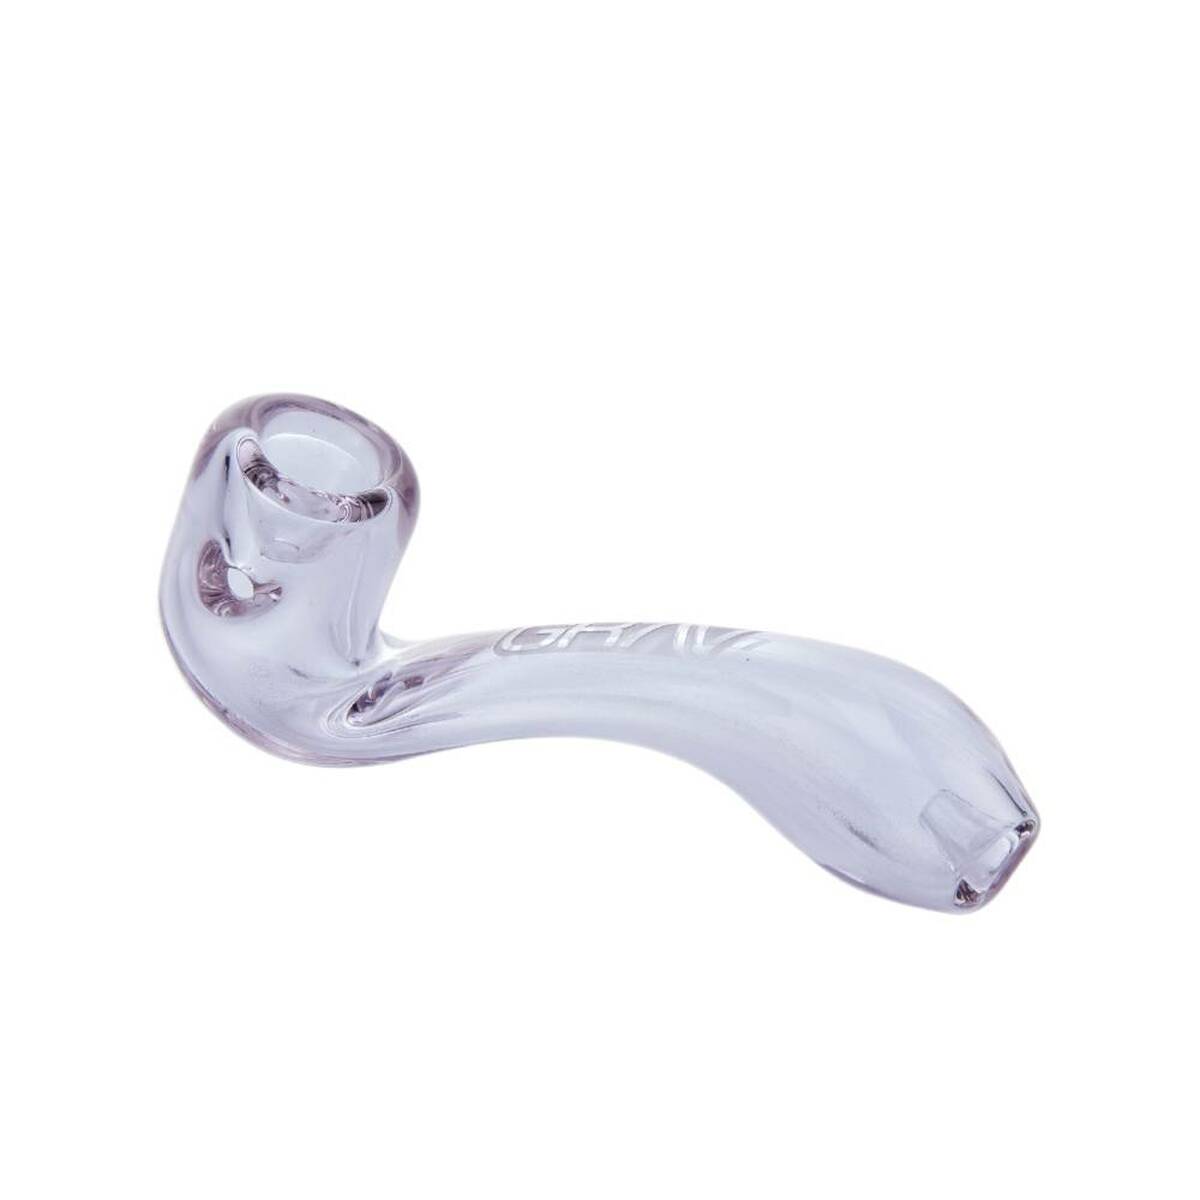 The small GRAV Sherlock is 4" long and made on 25mm tubing. It has an inverted mouthpiece that catches ash, and its small footprint makes it discreet and portable. No accessories or water are necessary for using this hand pipe. The Mini Sherlock is available in a variety of colour choices. 